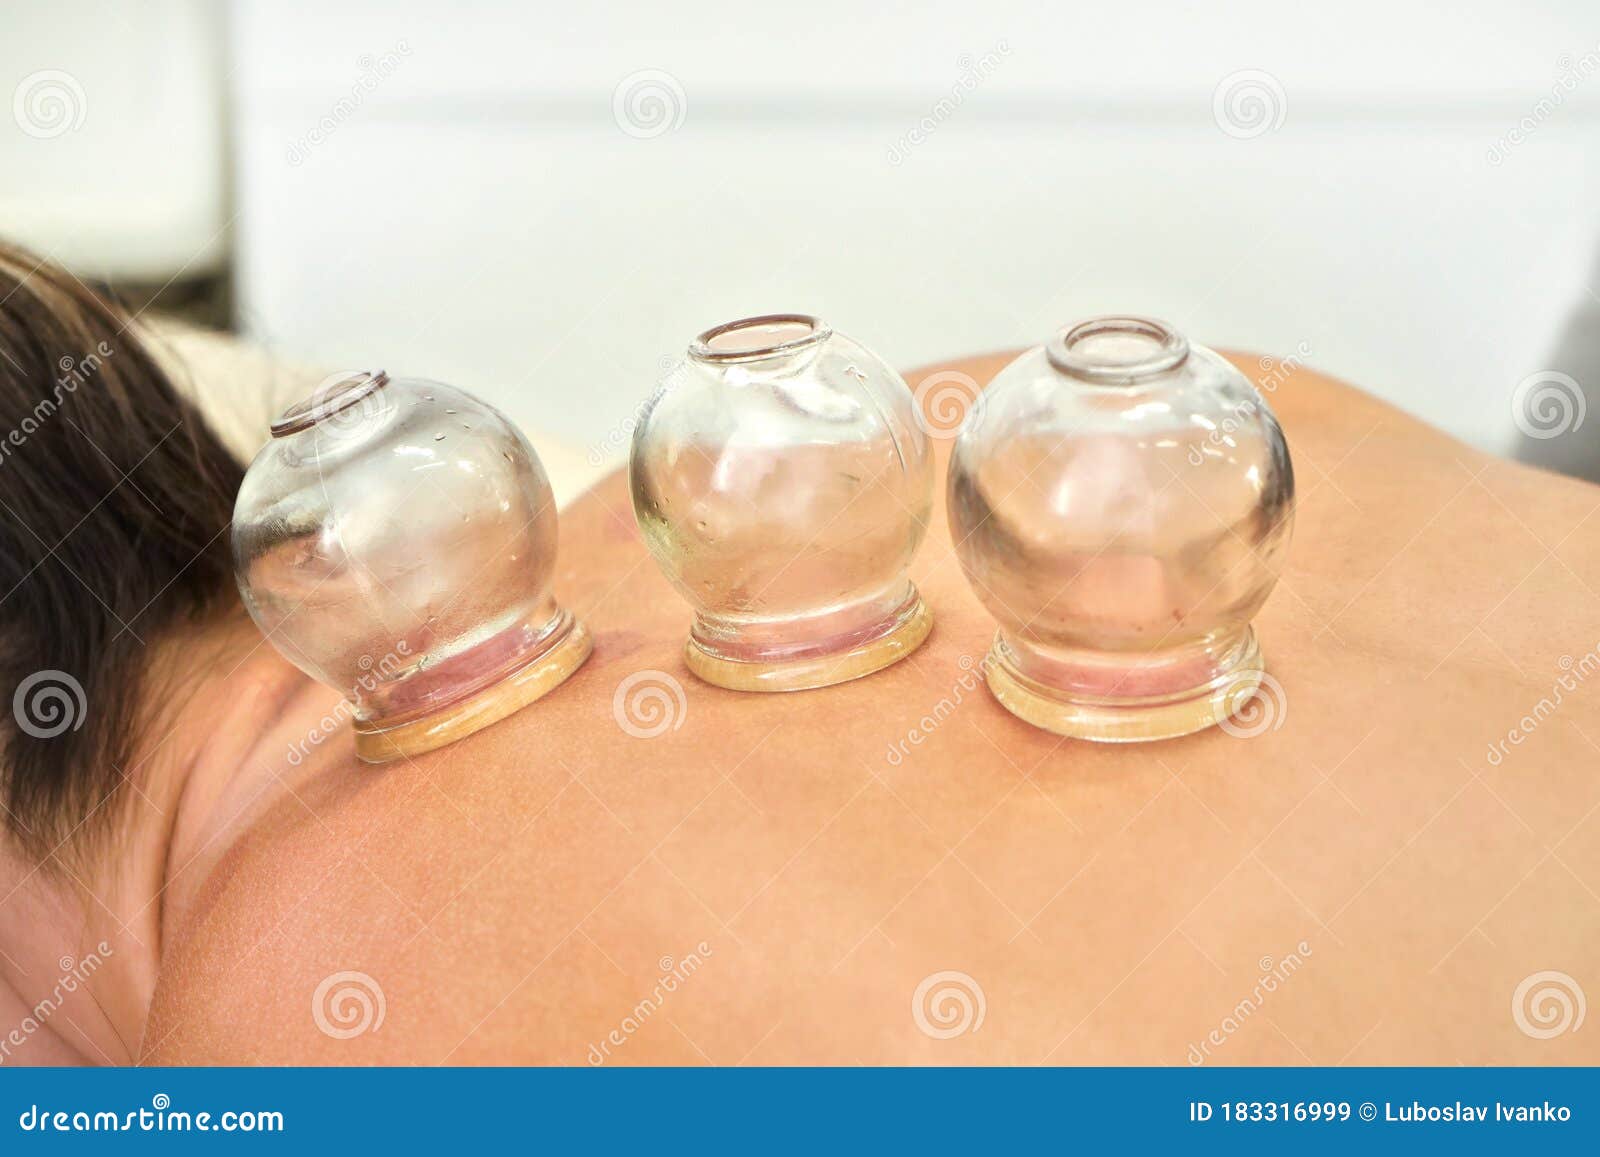 glass cups sucked on back of young woman - closeup detail of cupping therapy, alternative medicine form